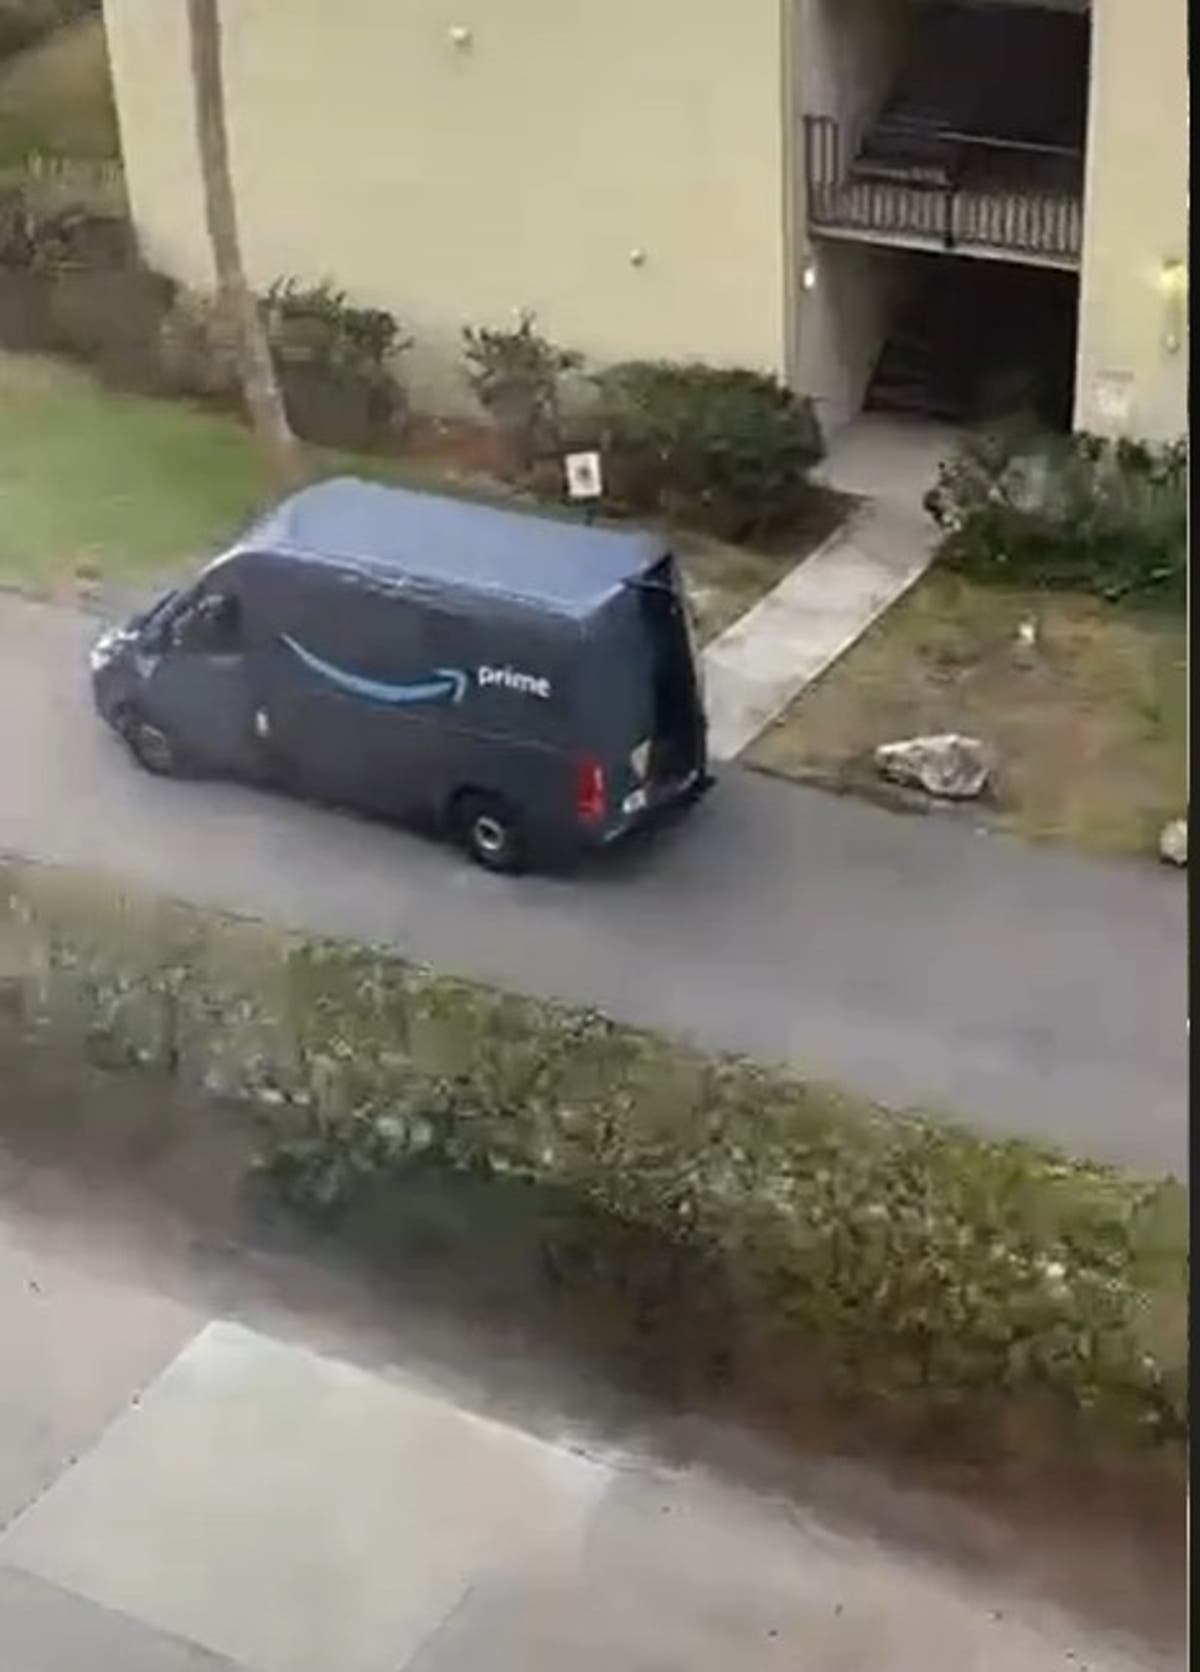 An Amazon driver has been shot after a TikTok video of a woman getting out of her truck went viral